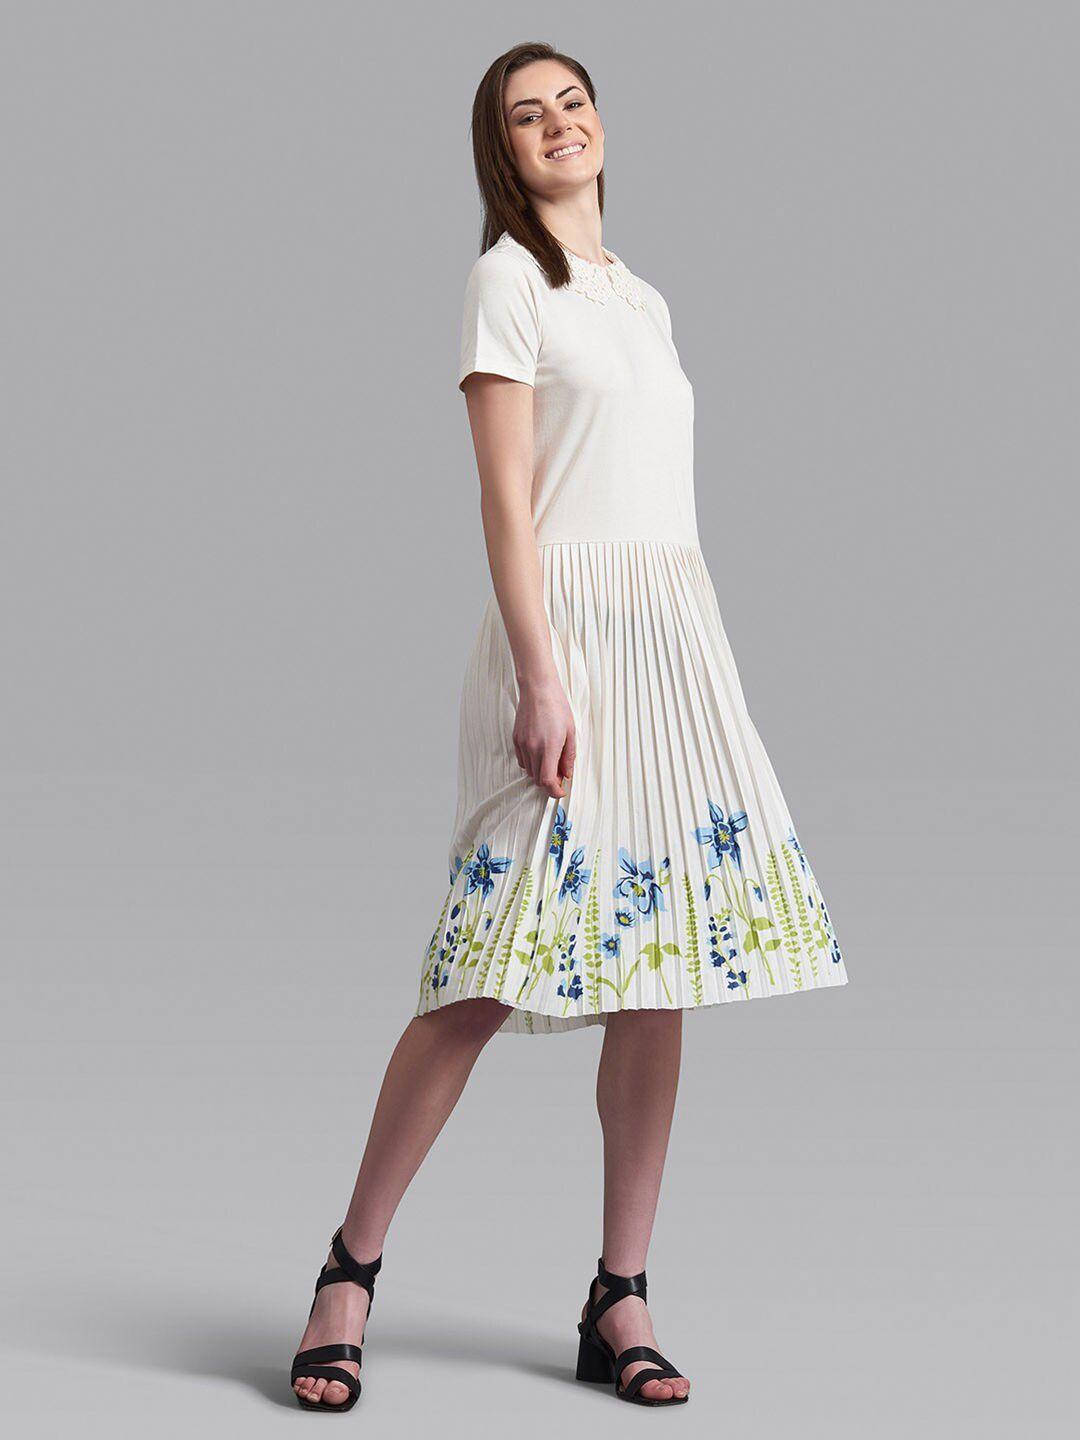 beverly hills polo club off white floral accordian pleats dress